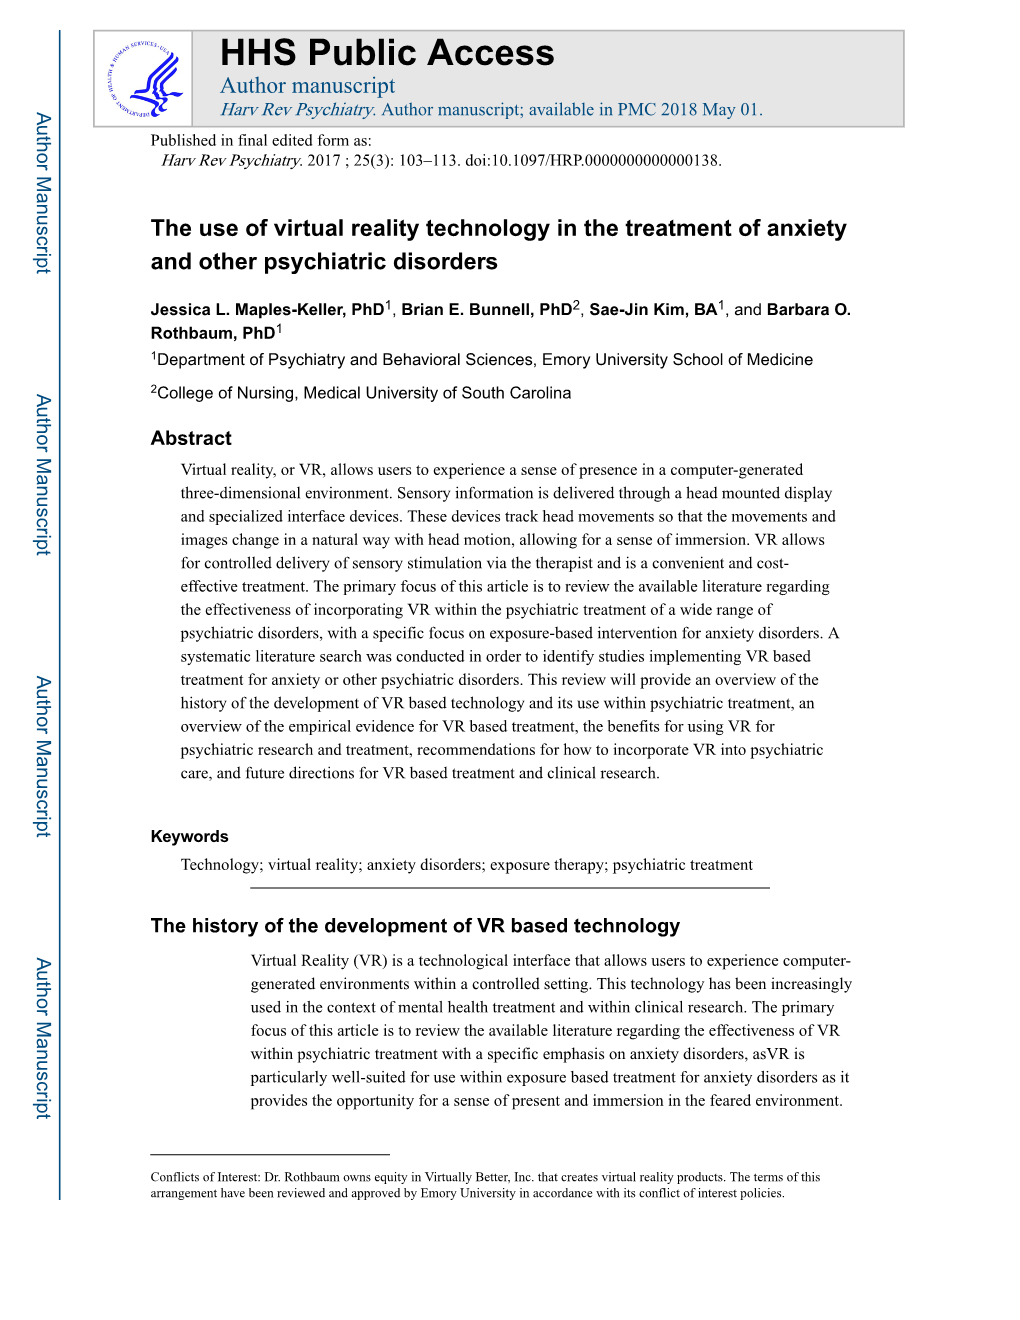 The Use of Virtual Reality Technology in the Treatment of Anxiety and Other Psychiatric Disorders